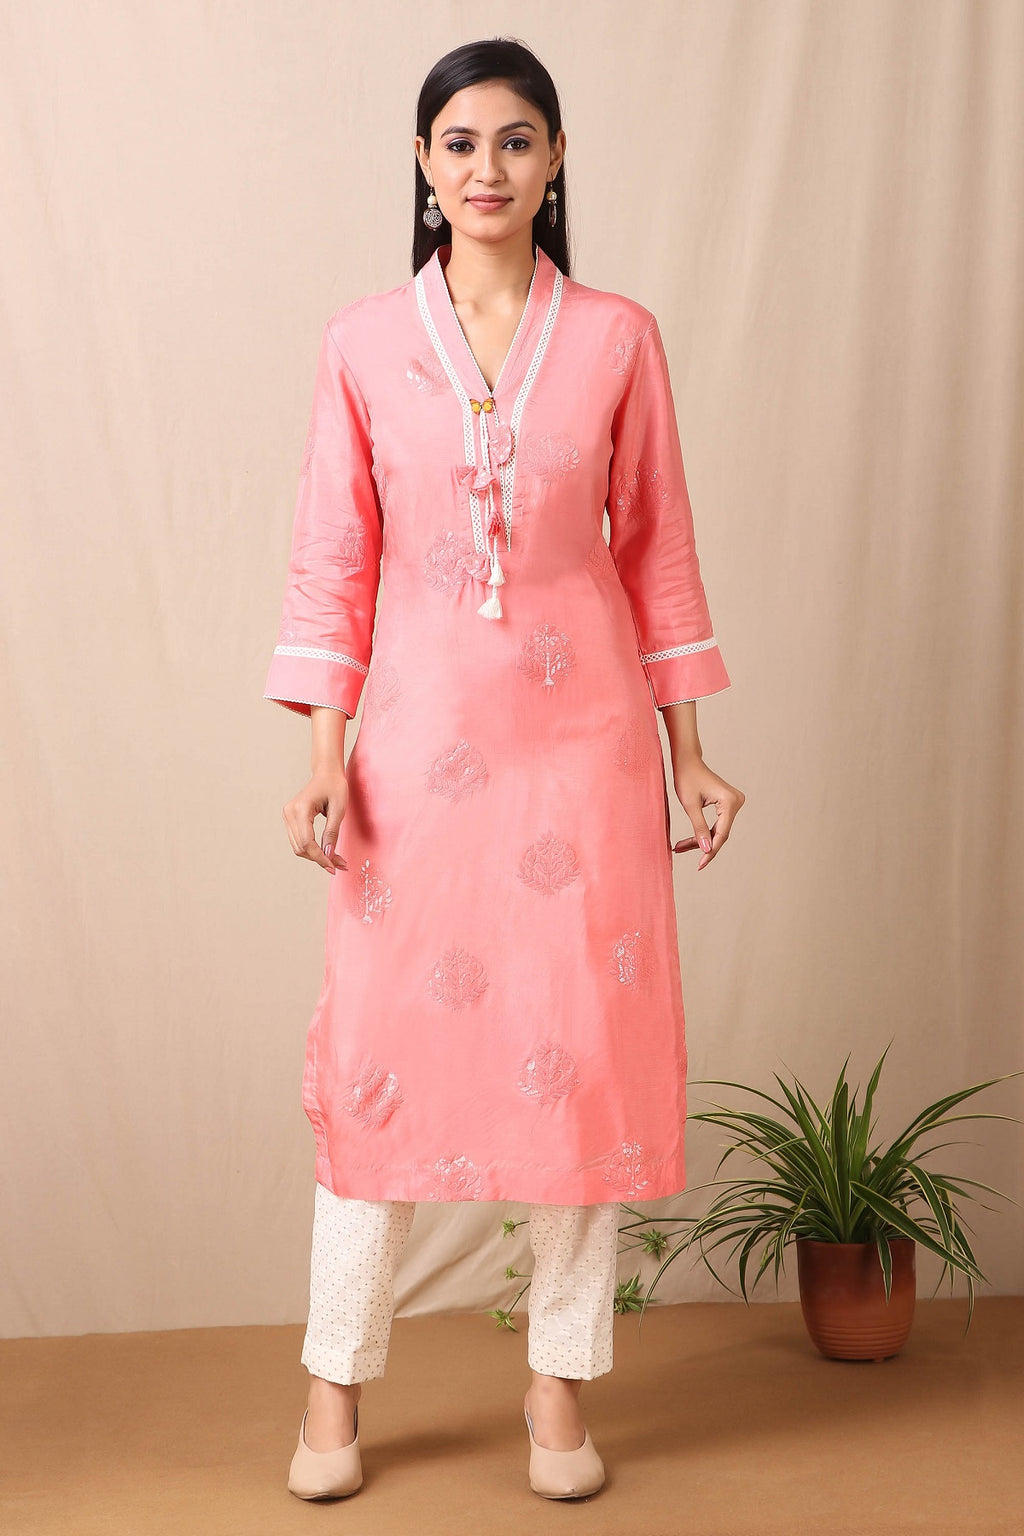 Shop beautiful set of Carrot Peach Upadda Silk Kurta with Tonal Sequins Motifs and lace around the neckline with beautiful tassels on it and cotton stretch white pant from Pure Elegance. Complete the look by wearing statement jewellery and heels. Light up your ethnic collection of clothing with this kurta cotton white pant set from Pure elegance.  Pair it up with statement jewellery to complete your look from Pure Elegance Indian clothing store in USA online now.-Full view.